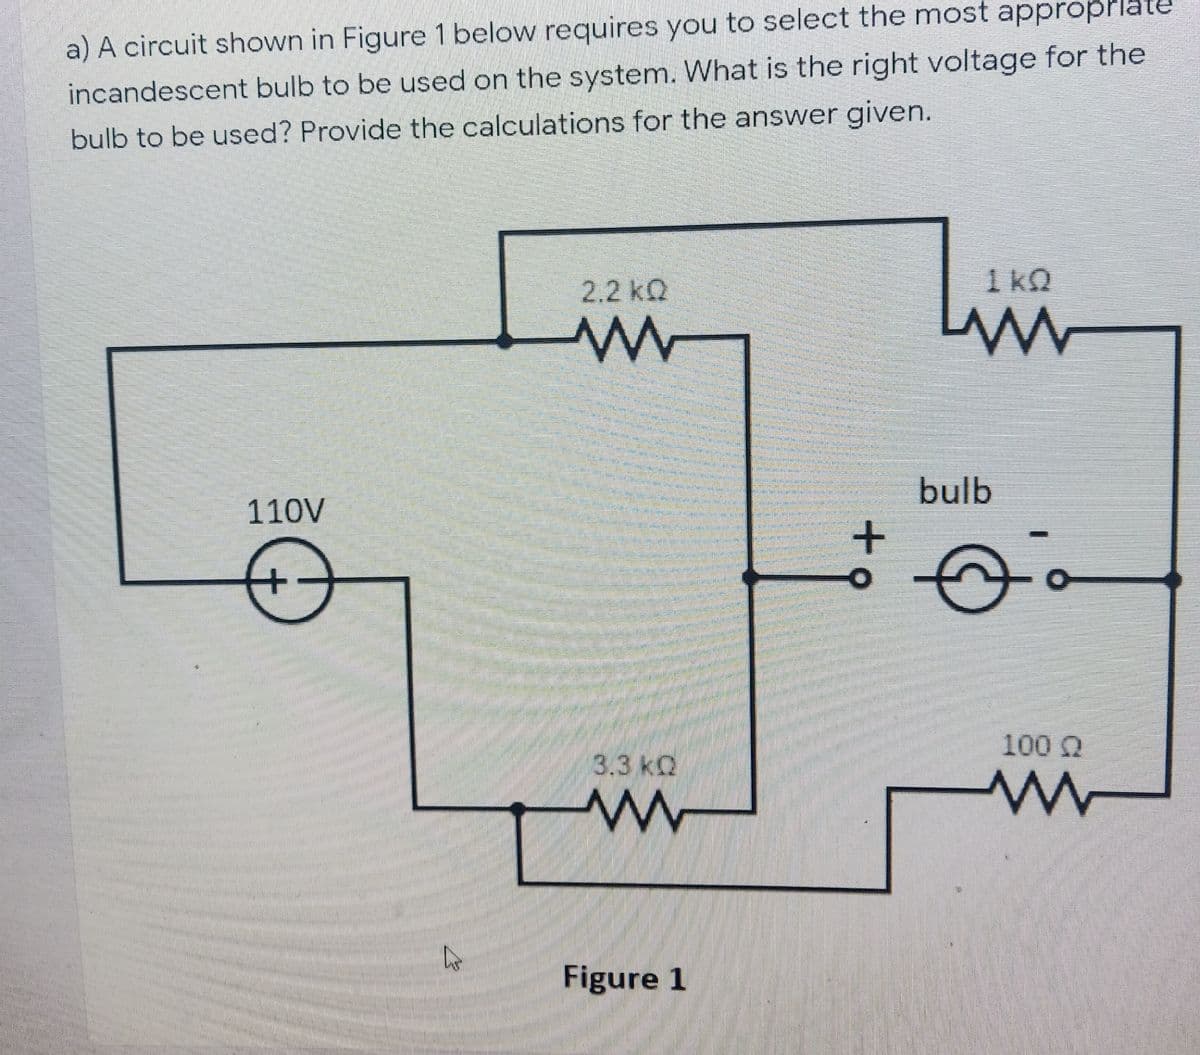 a) A circuit shown in Figure 1 below requires you to select the most appropPlat
incandescent bulb to be used on the system. What is the right voltage for the
bulb to be used? Provide the calculations for the answer given.
2.2 kQ
1 kO
bulb
110V
+
100 Q
3.3 kQ
Figure 1
